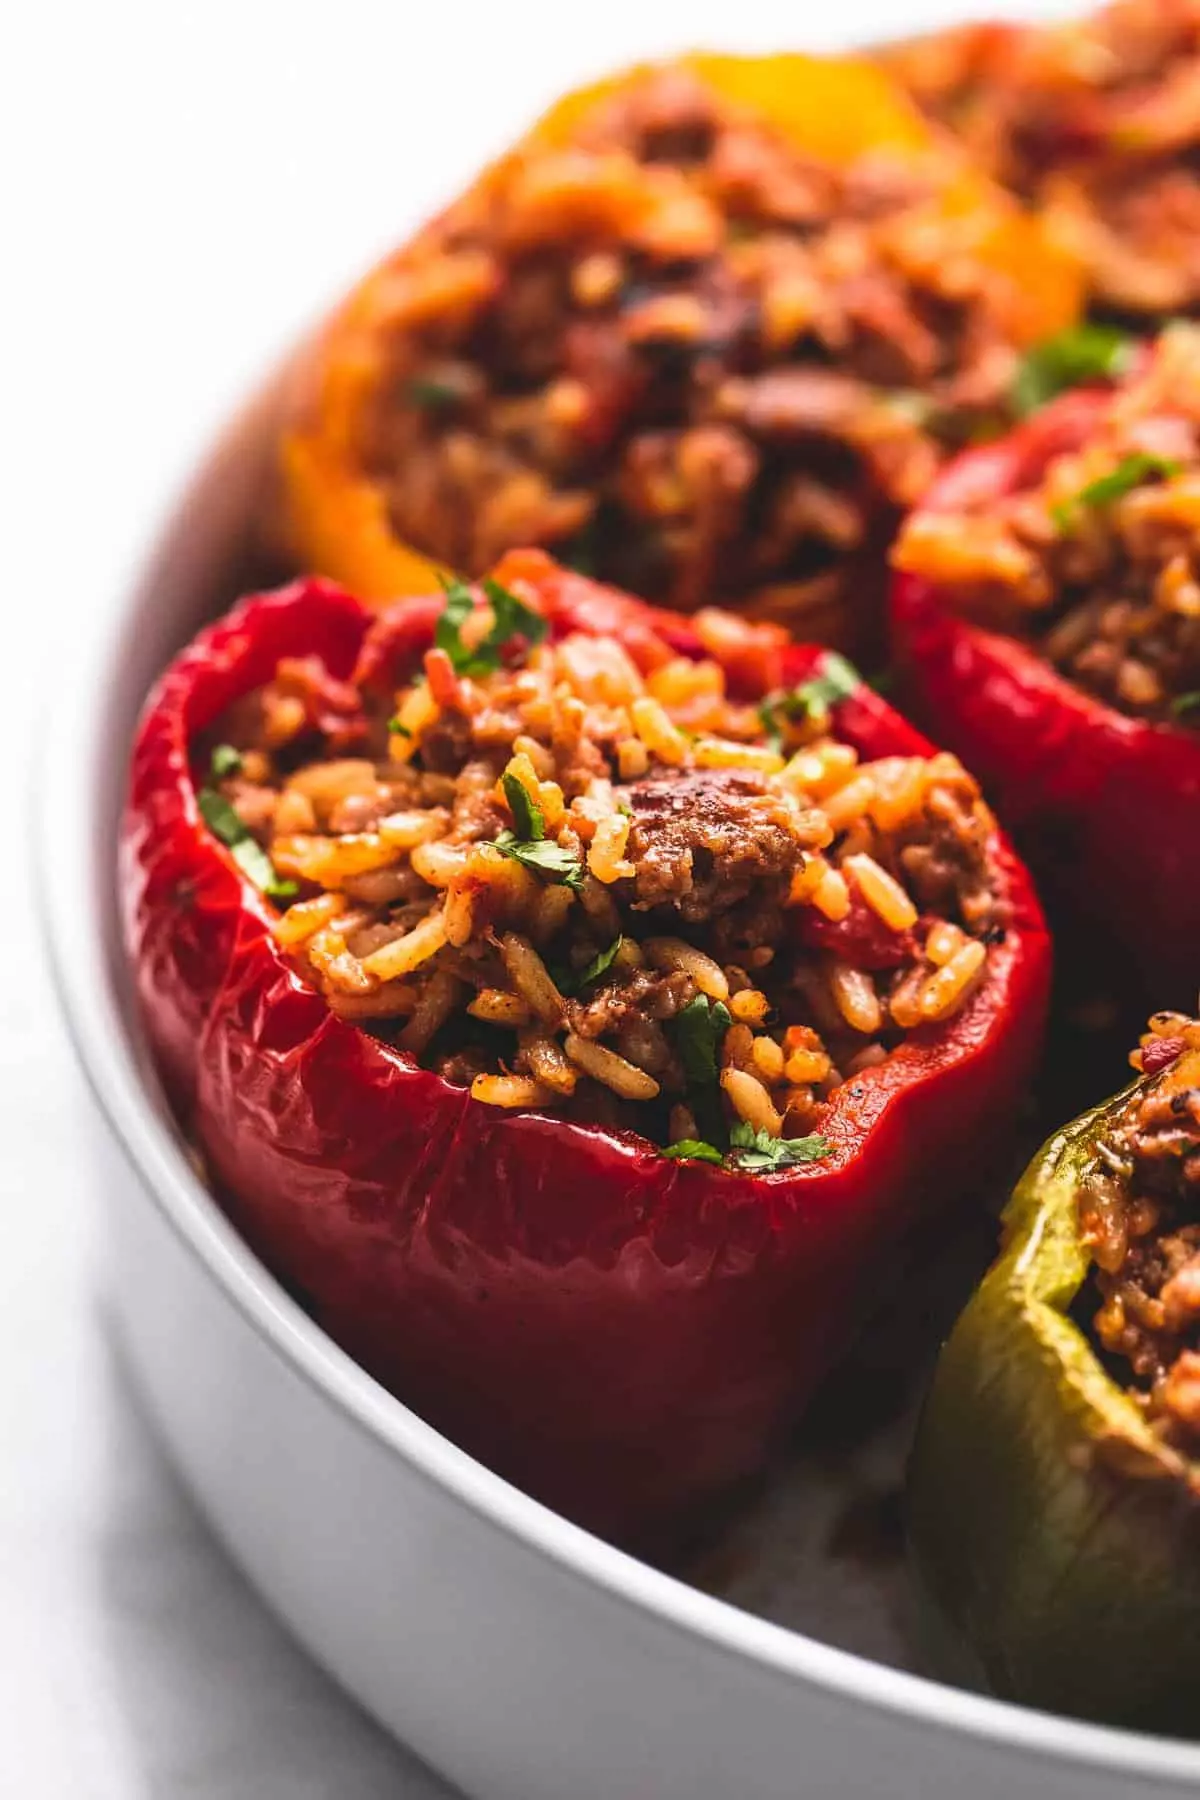 Deliciously stuffed peppers